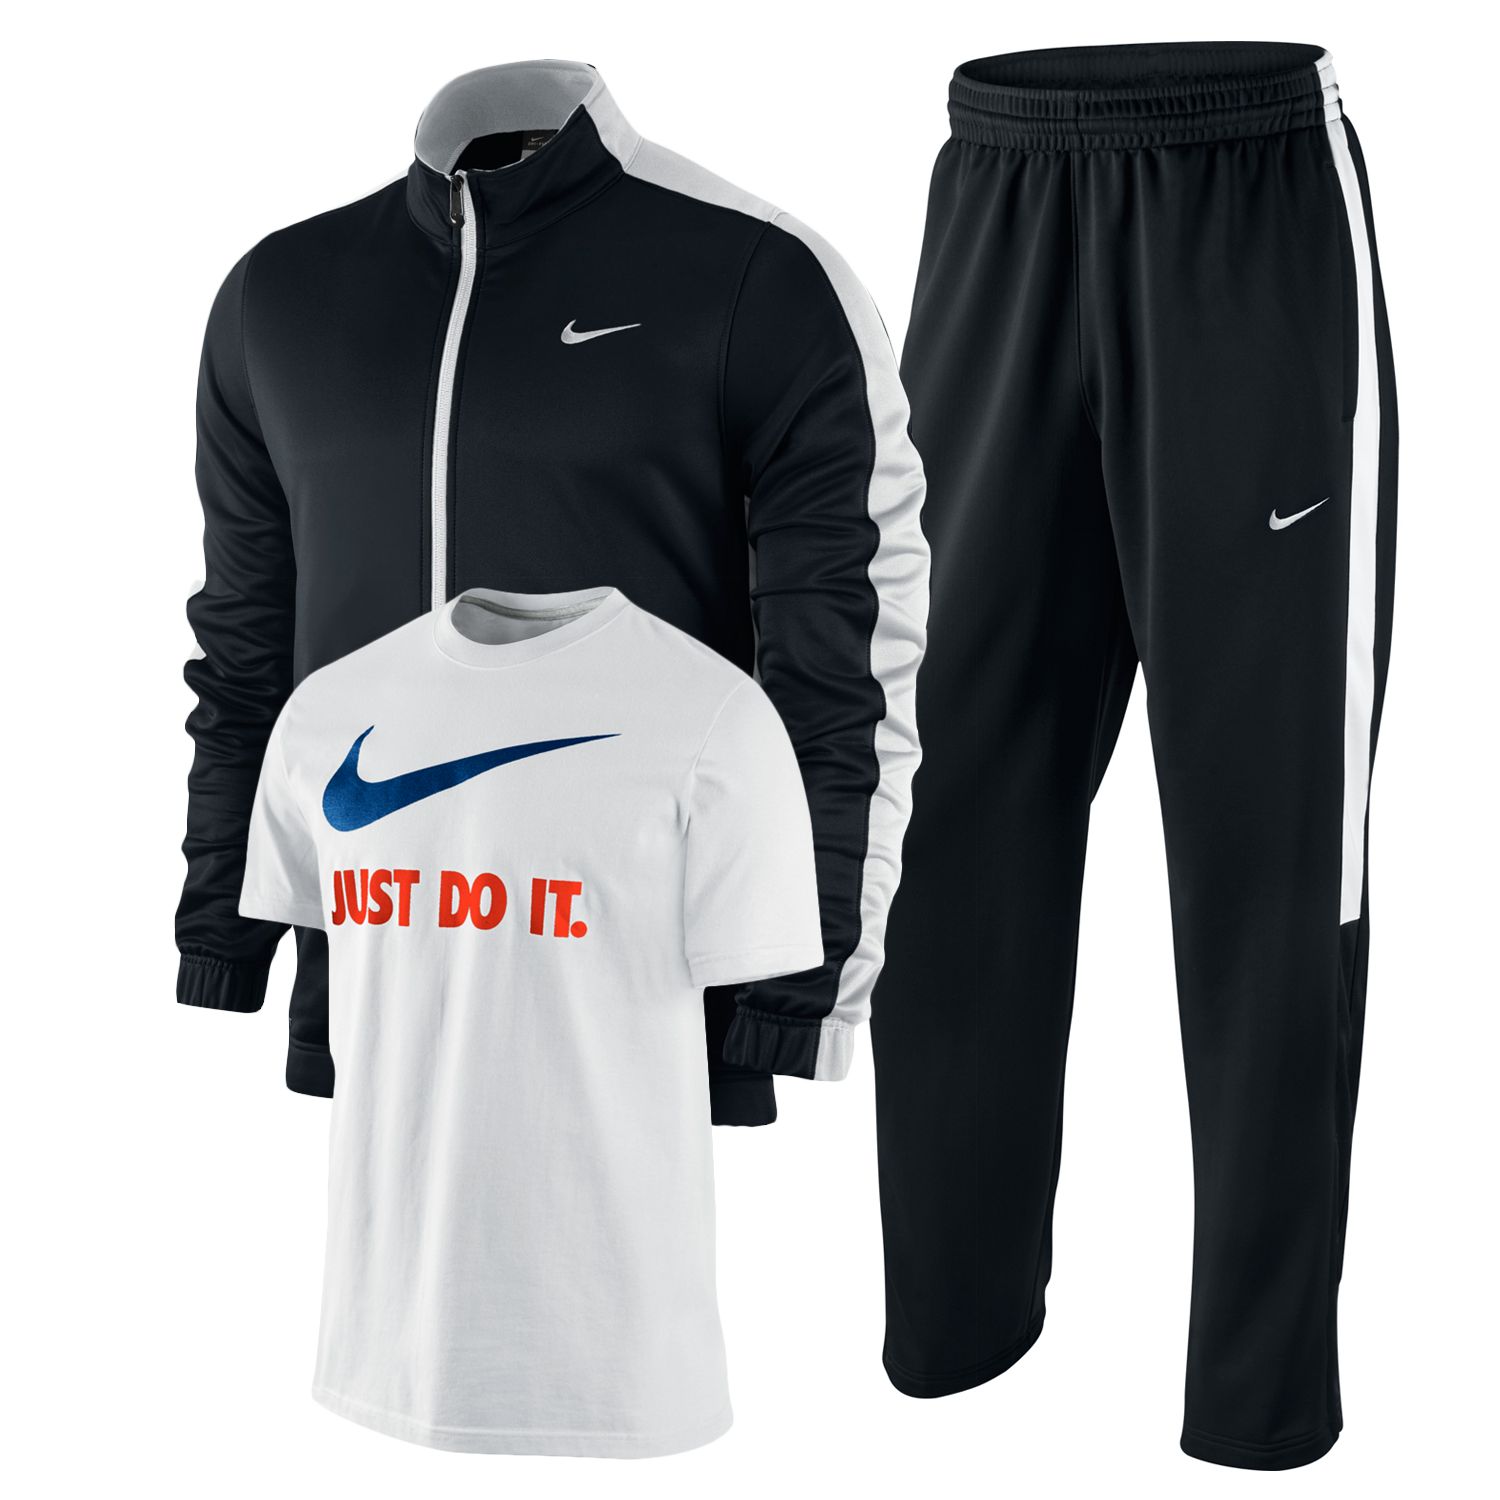 Men's Nike Complete Sweatsuit Collection